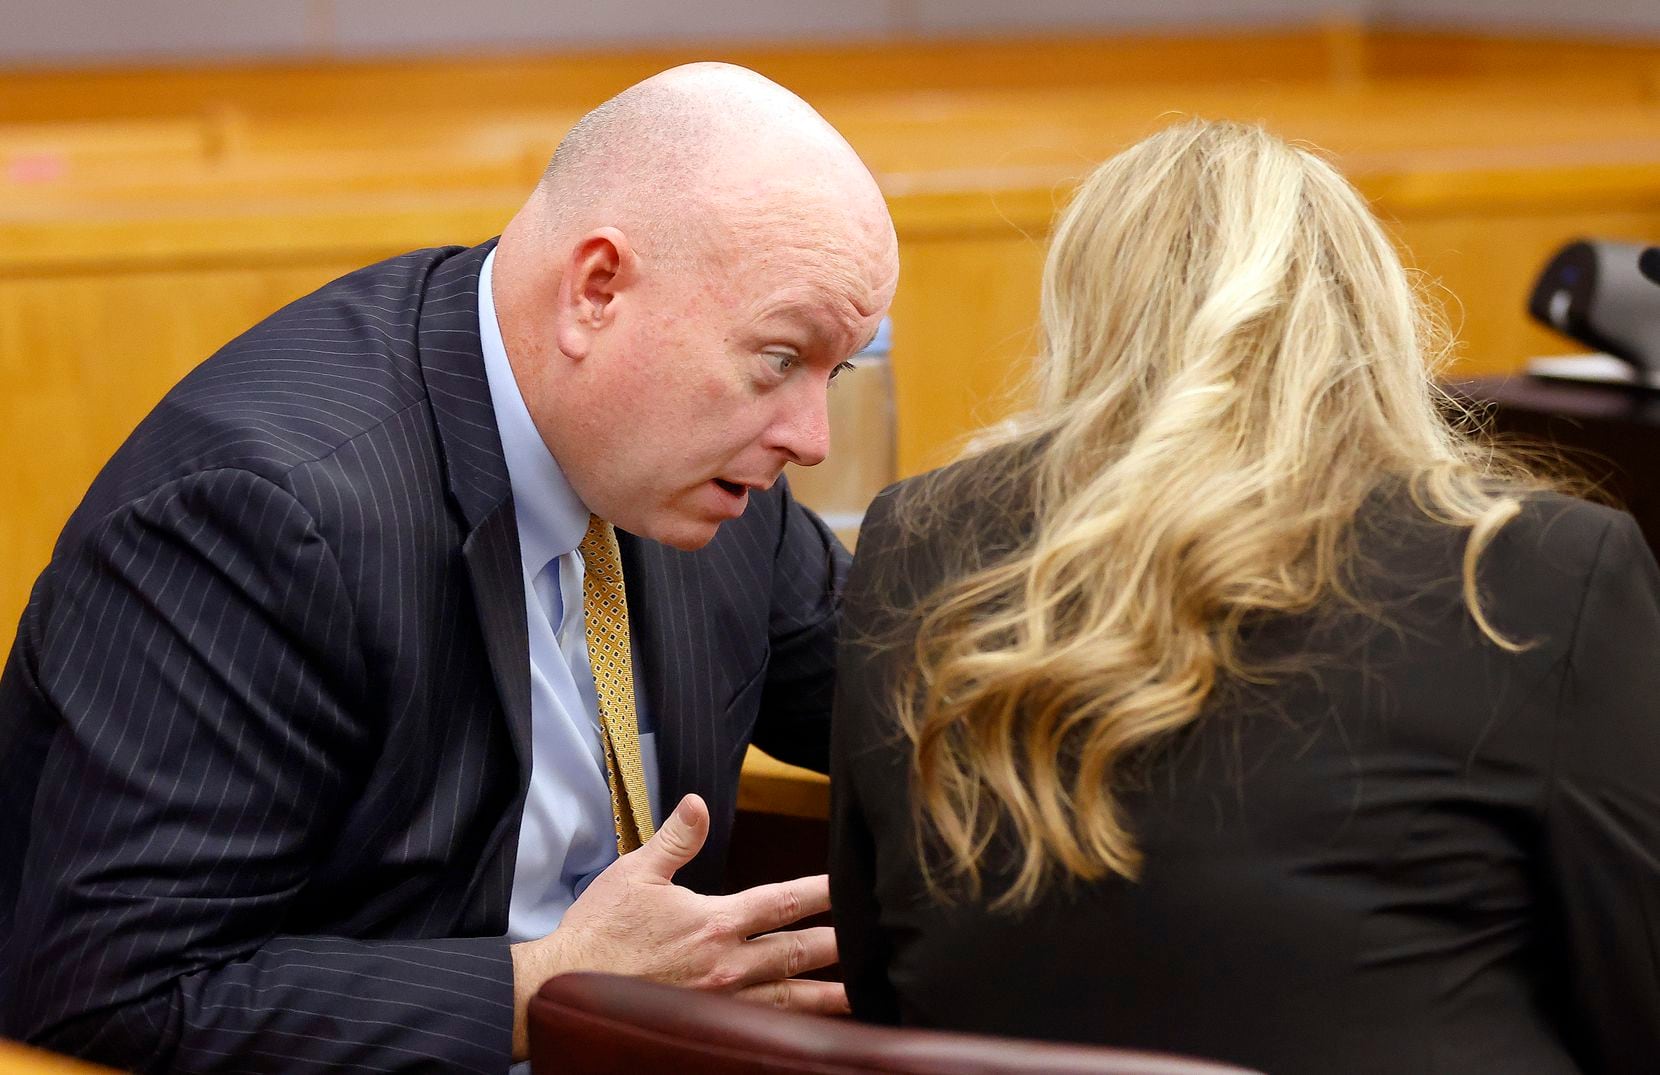 Prosecutor Glen Fitzmartin (left) confers with Assistant District Attorney Jaclyn O'Connor in the courtroom as motions and language are prepared for delivery to the jury deliberating whether to convict Billy Chemirmir on Friday.